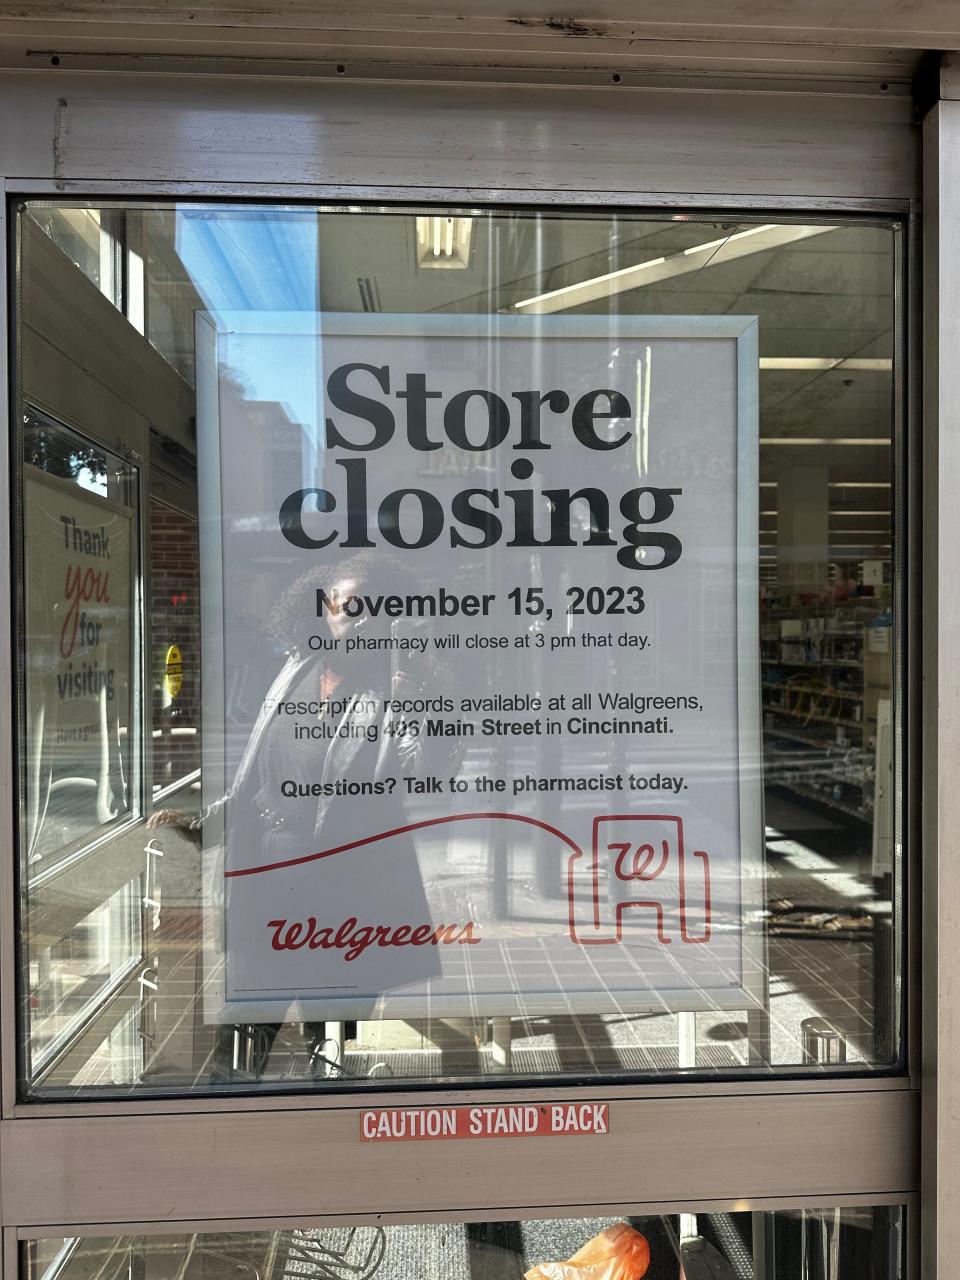 Walgreens, located at 601 Race St., will permanently close Nov. 15, according to a sign on the storefront window.